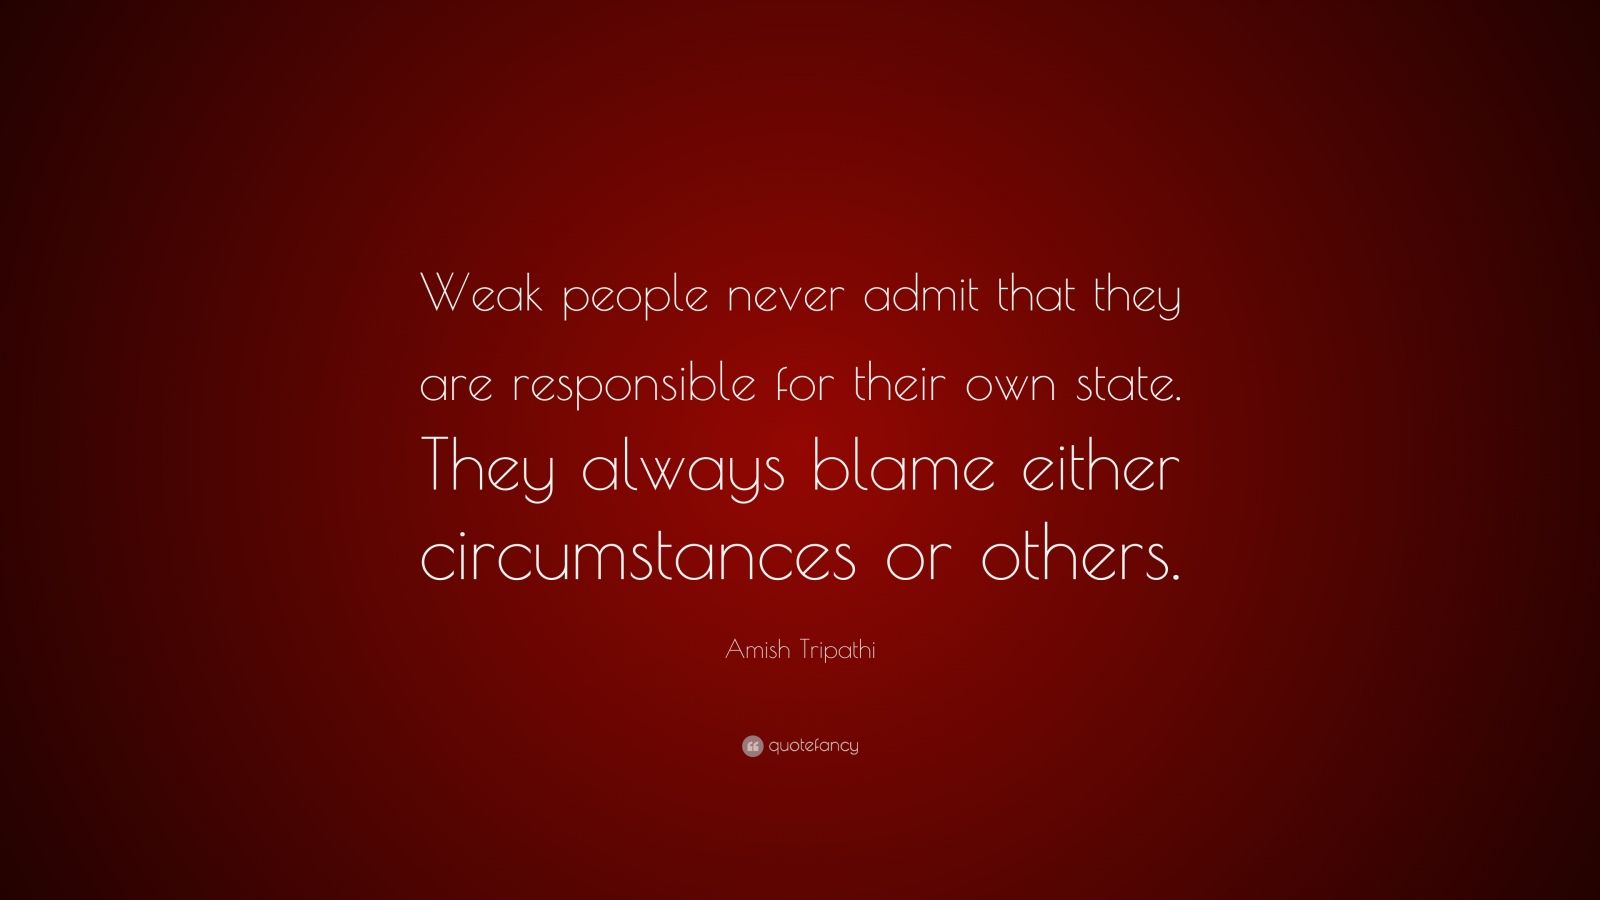 Amish Tripathi Quote: “Weak people never admit that they are ...